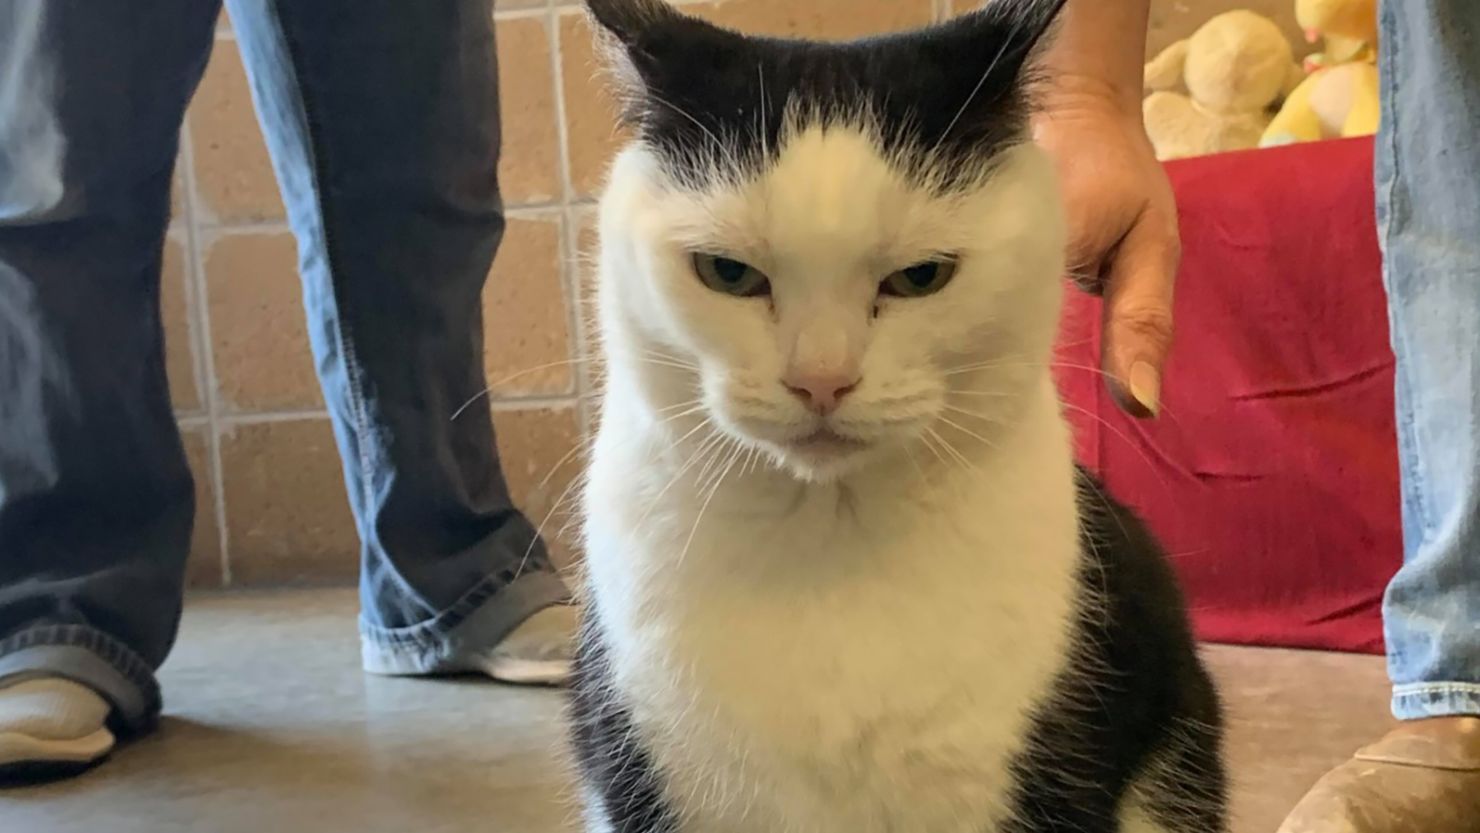 Fierce Feline Named 'Angry Pearl' Goes From Shelter to Viral Stardom - ABC  News